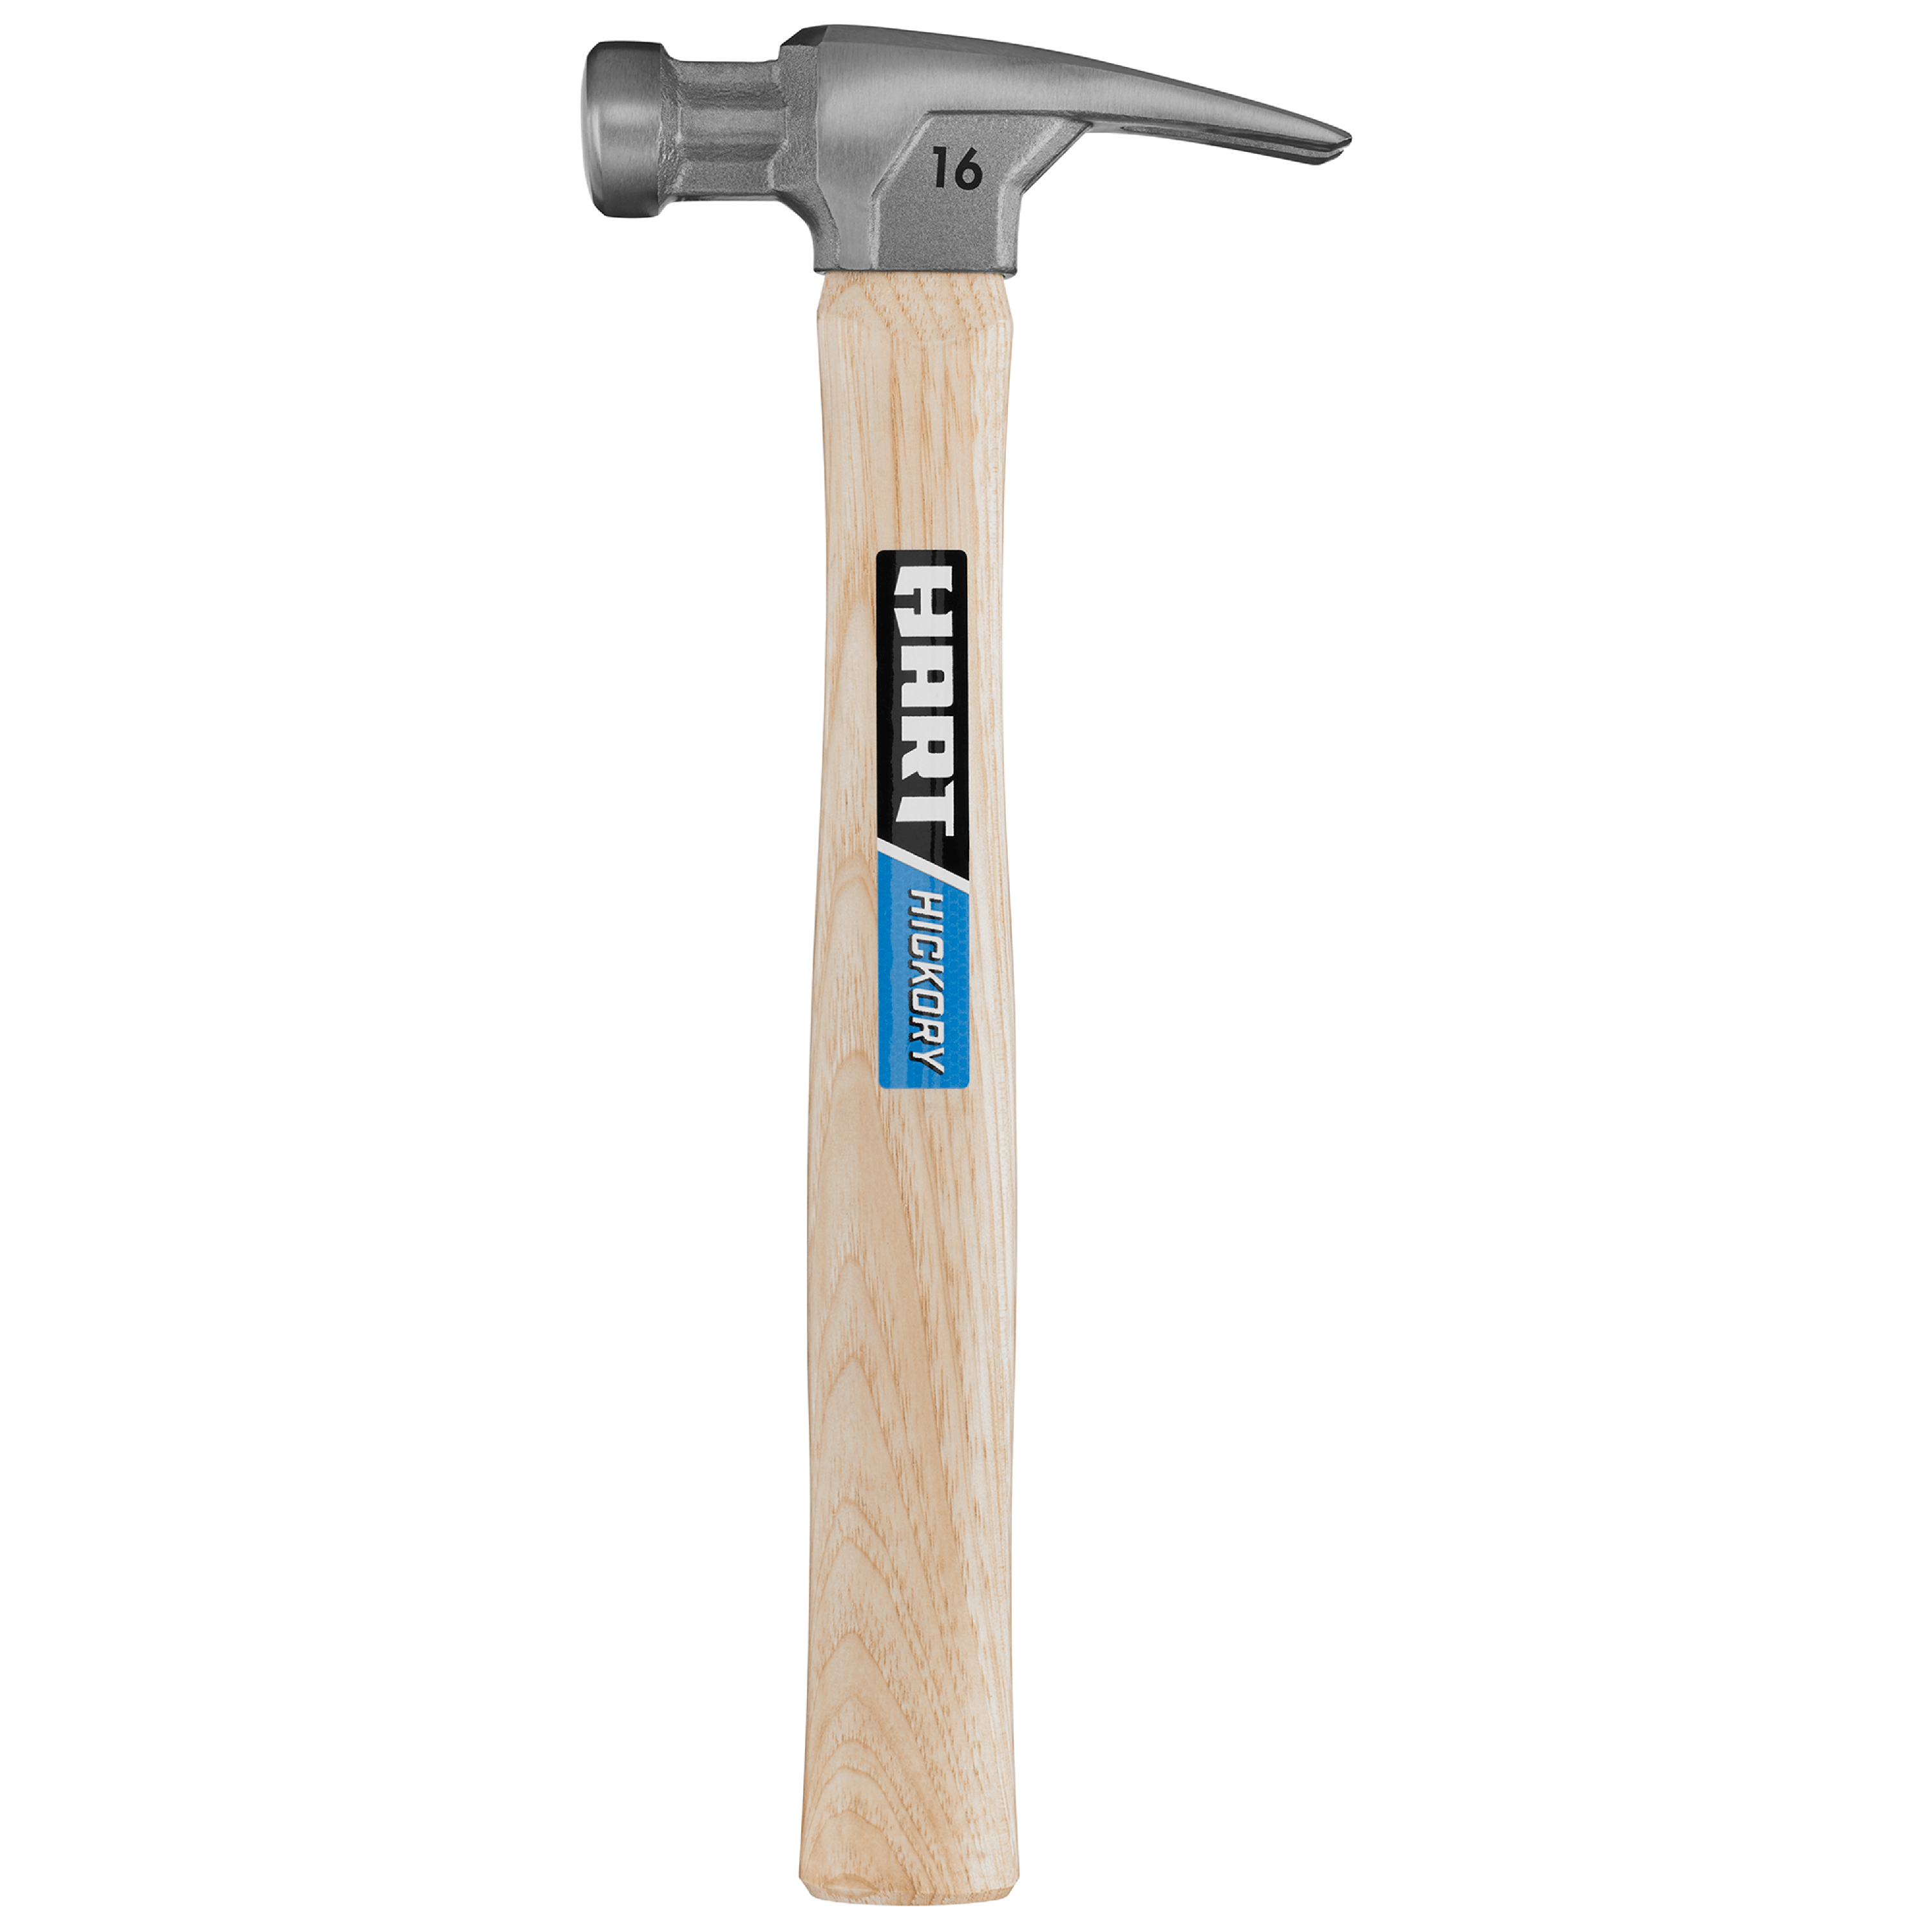 HART 16oz Wood Handle Hammer, Rip Claw, Magnetic Nail Starter - image 1 of 7